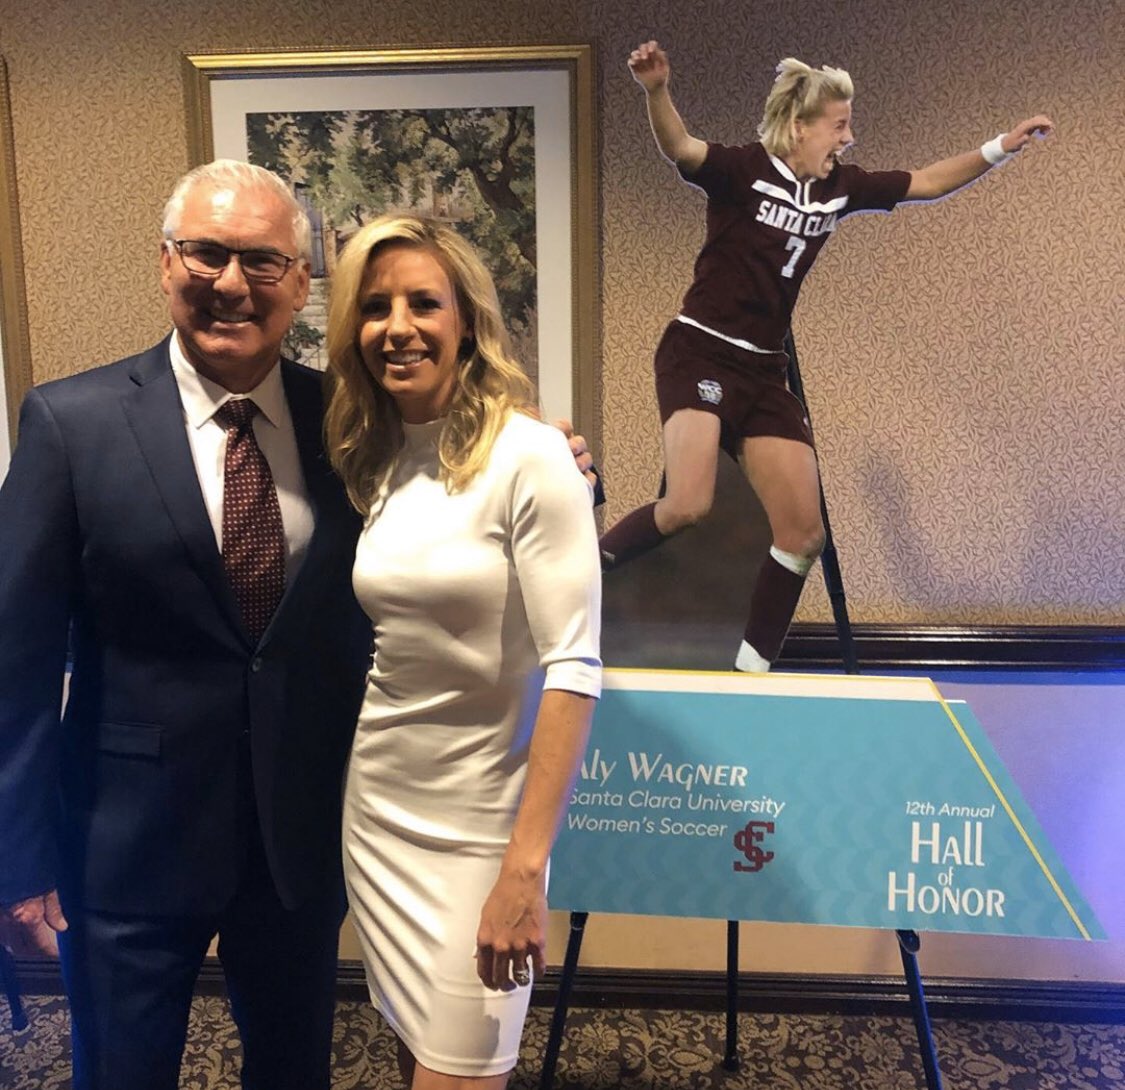 CONGRATS to @alywagner for her well-deserved @WCCsports Hall of Honor induction.....a sweeeeet @revealsuits commemorative Blazer is on the way soon! @SCUWomensSoccer @SCUBroncos @SantaClaraUniv  #santaclara #santaclarabroncos